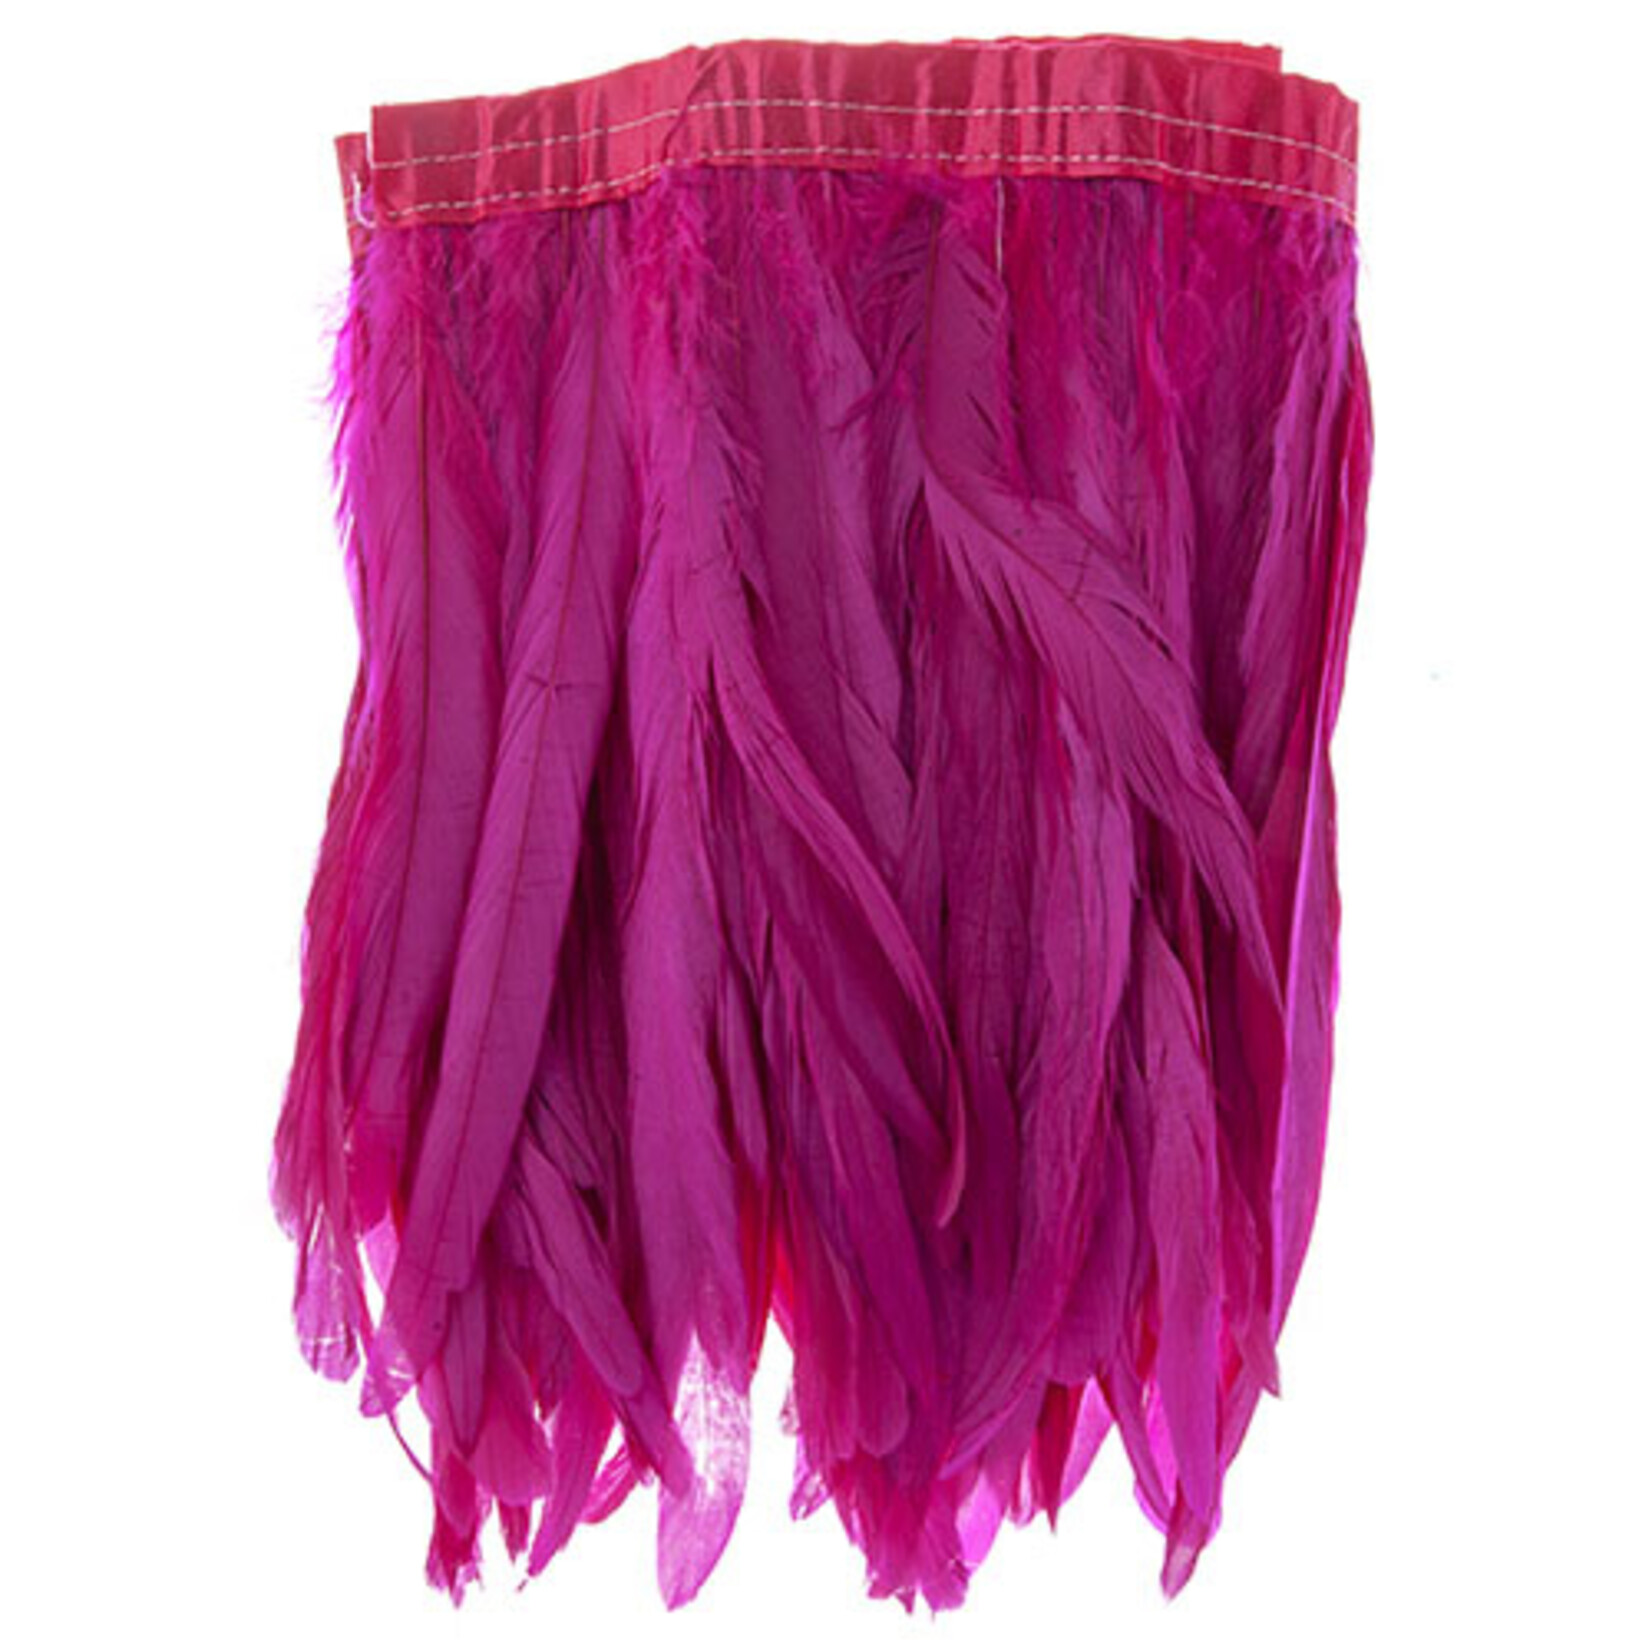 Coque Feathers Value 12-14 Inches Hot Pink